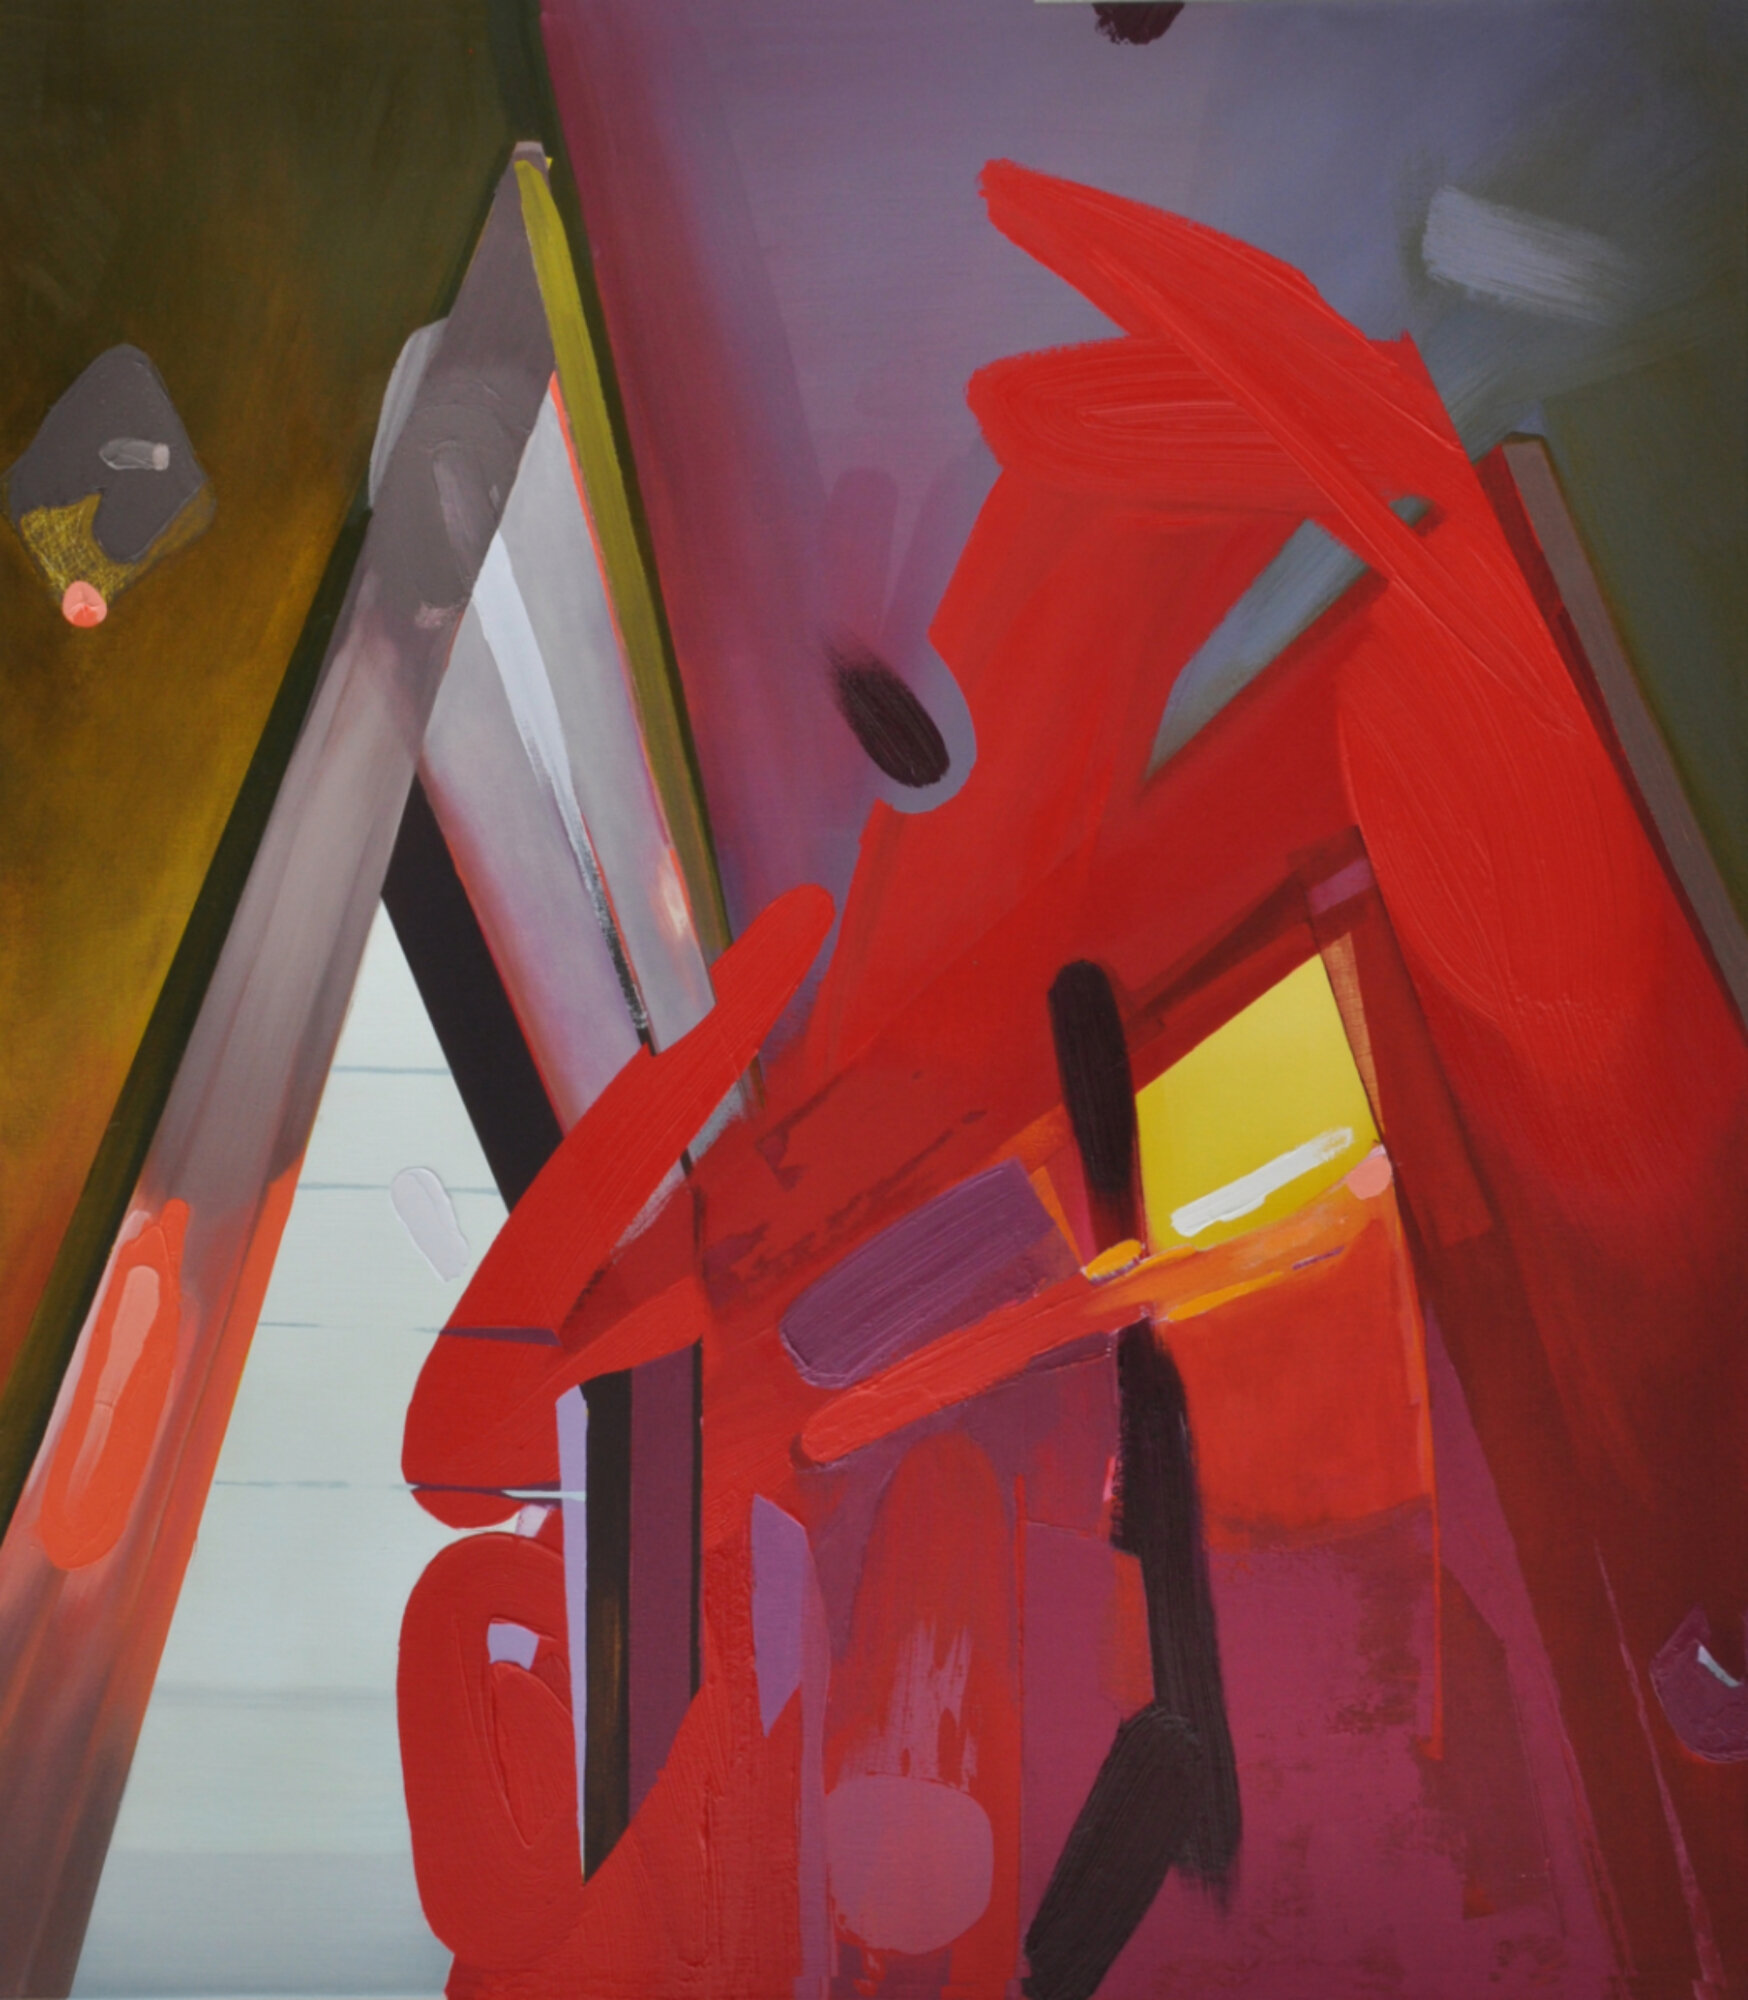   Andrea Barone ,  enter red,  oil on canvas, 32x36 inches, $1,600 